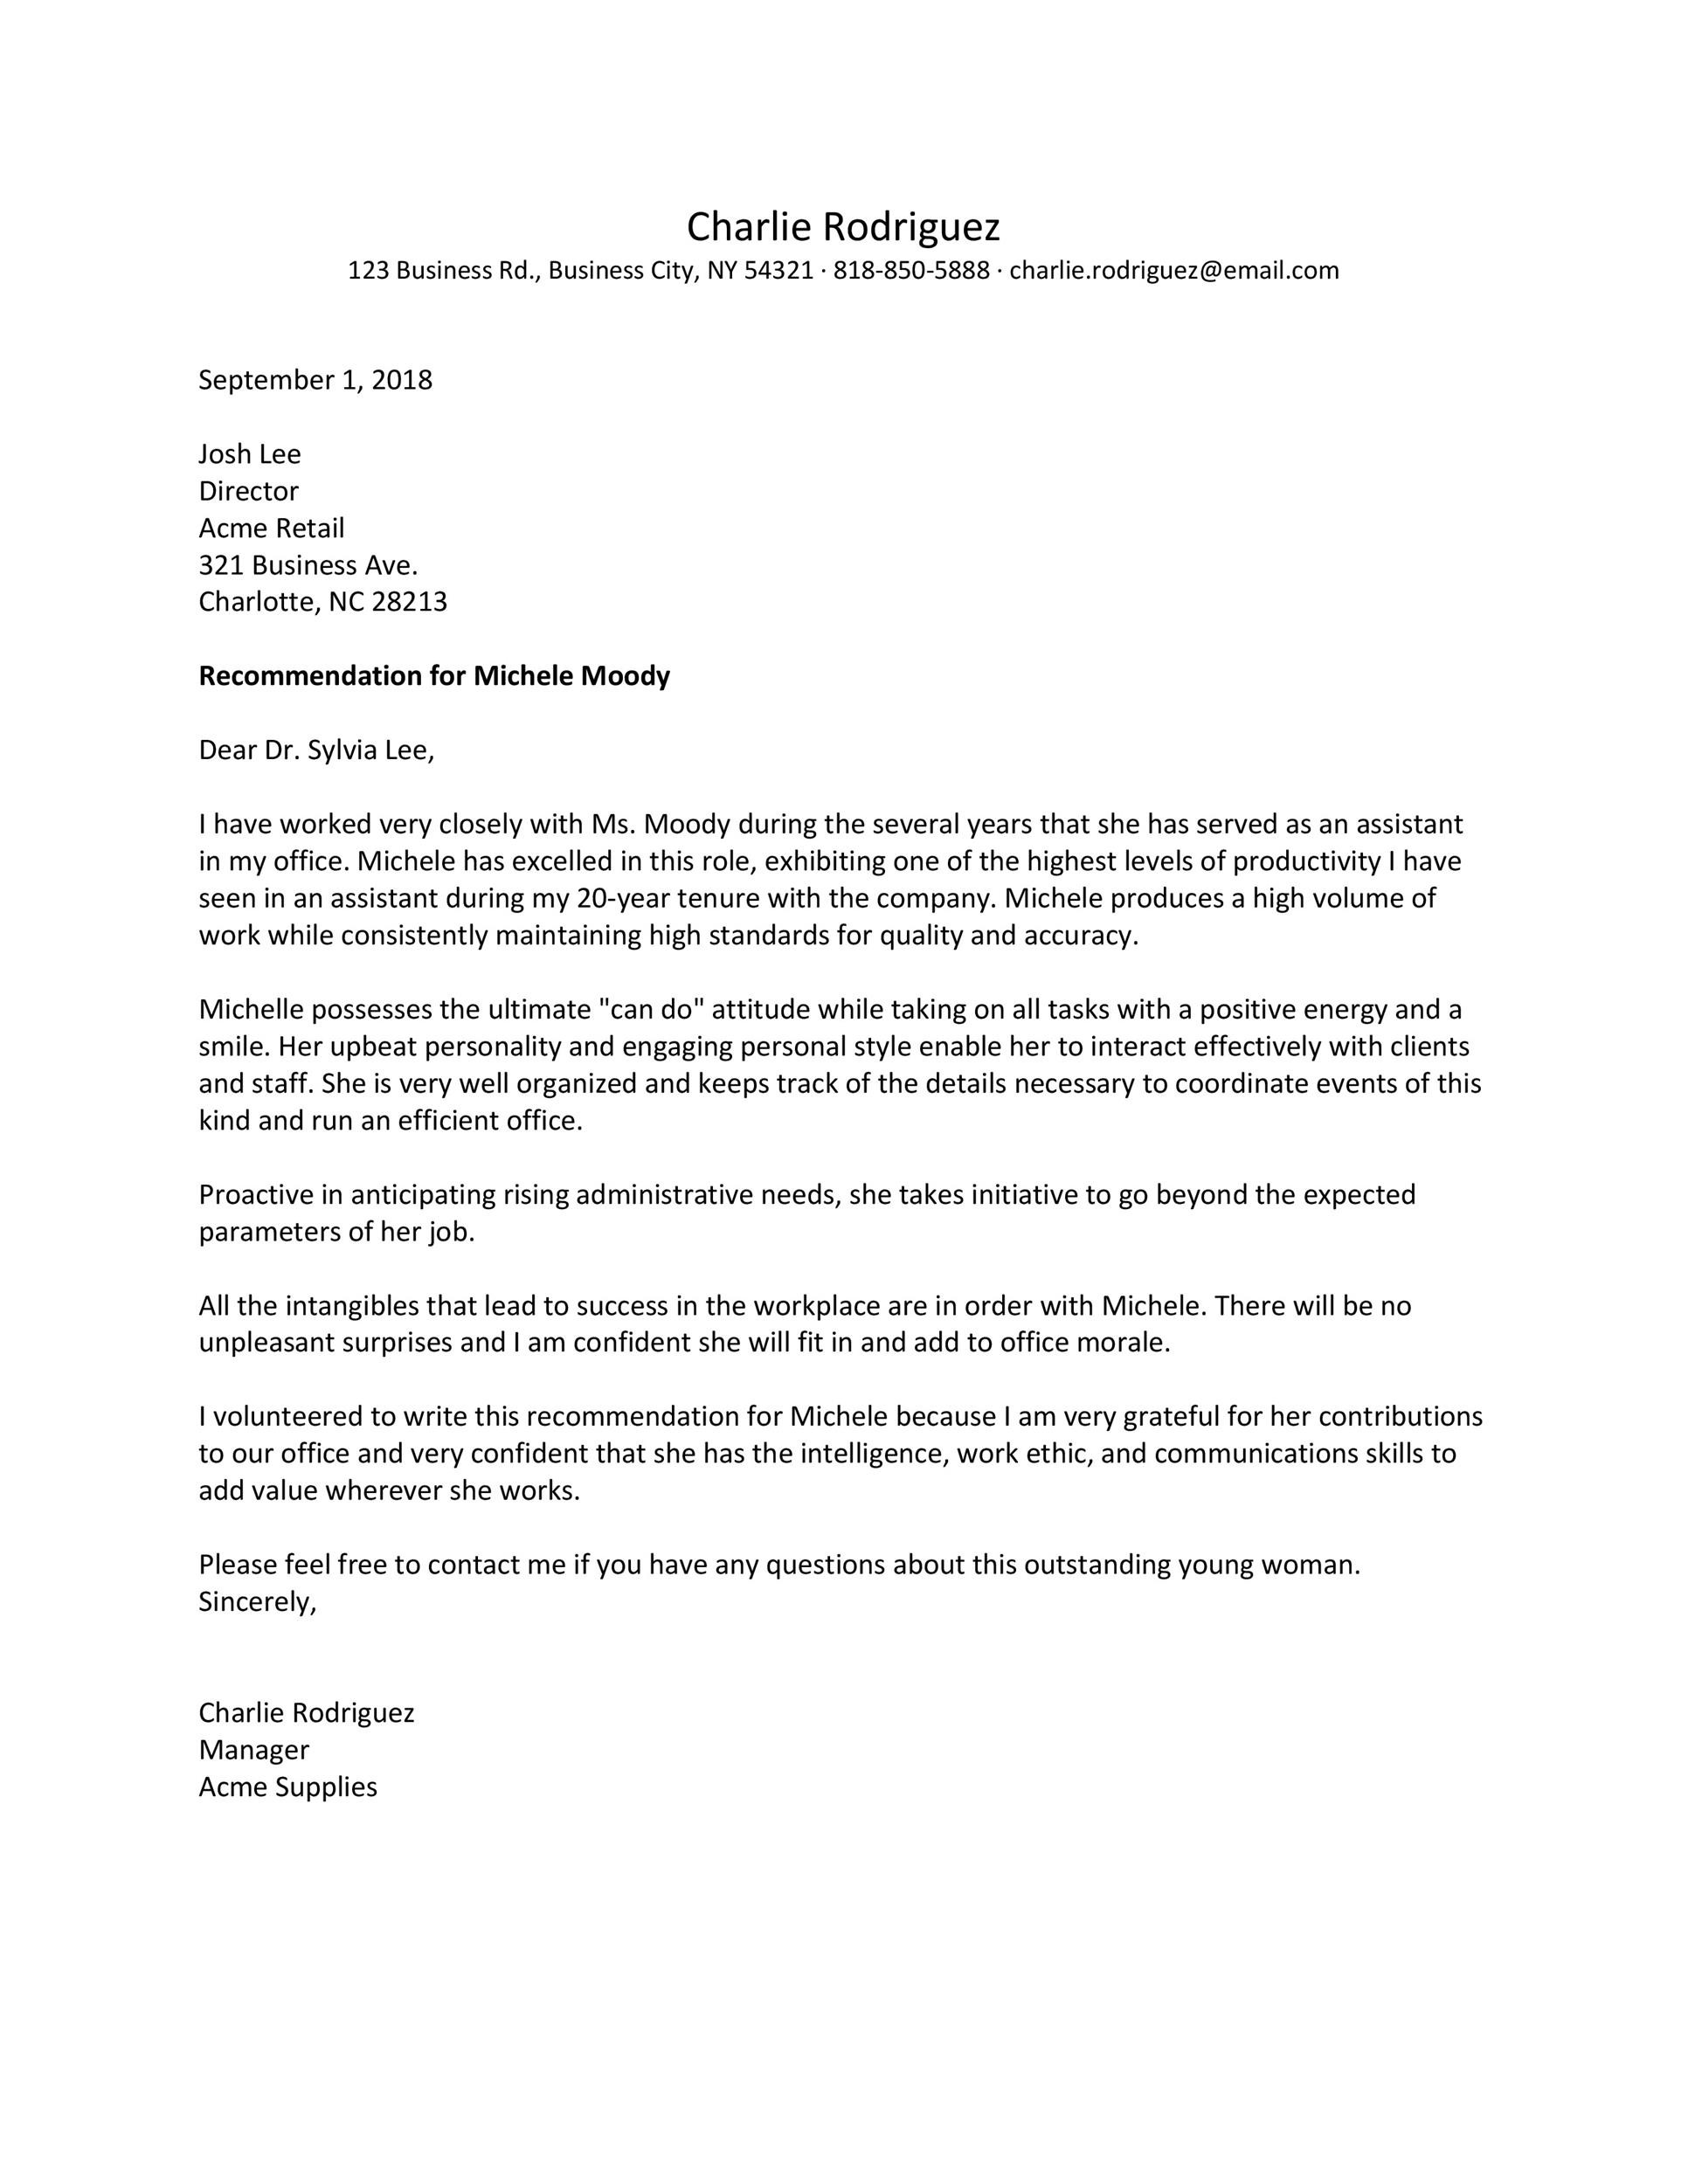 Recommendation Letter To An Employee